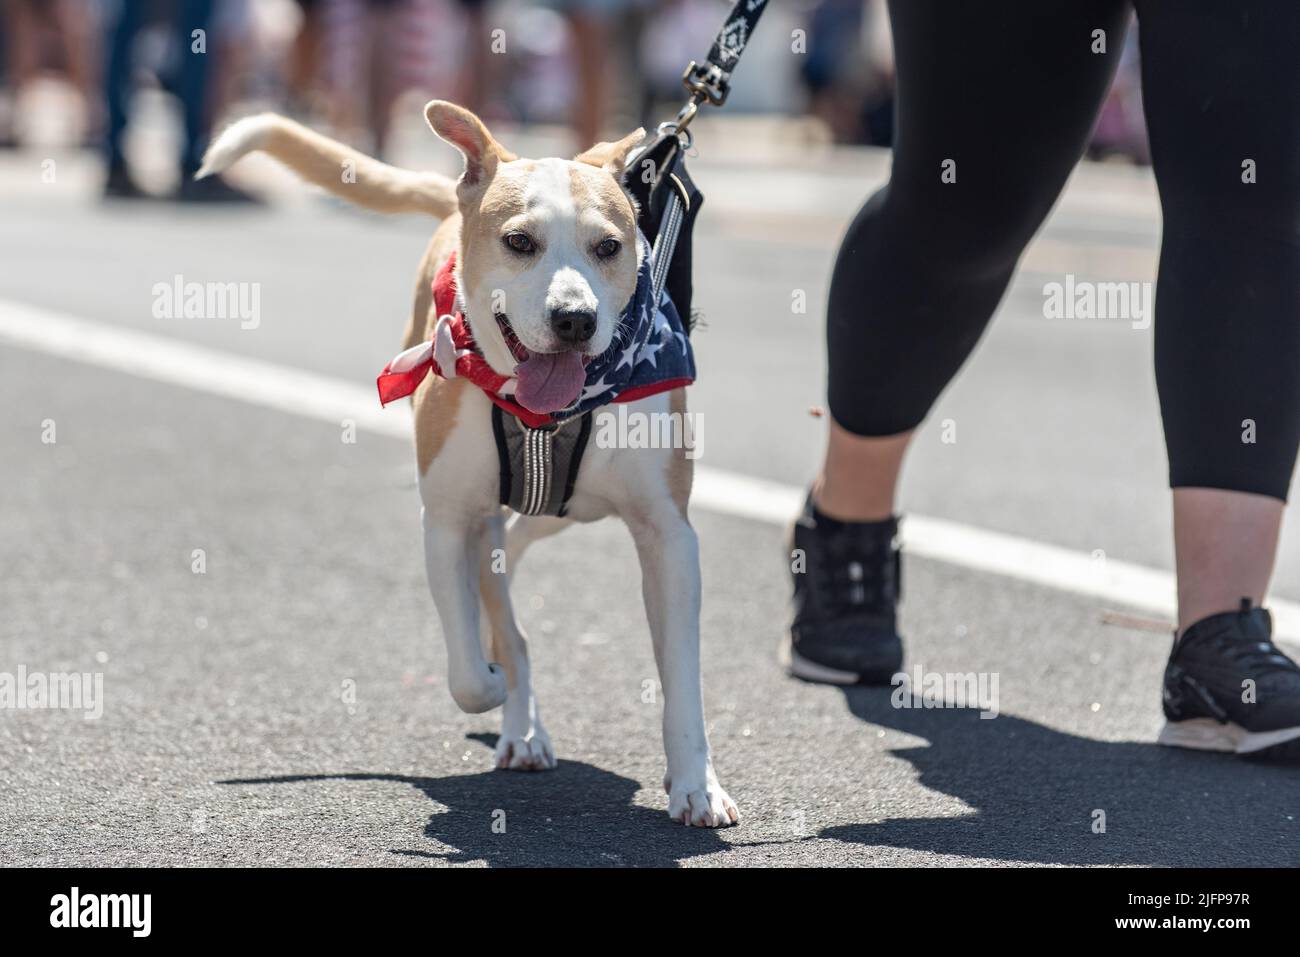 Forth of July holiday parade in small town is perfect place to walk the Jack Russel dog with stars and stipes bandana. Stock Photo